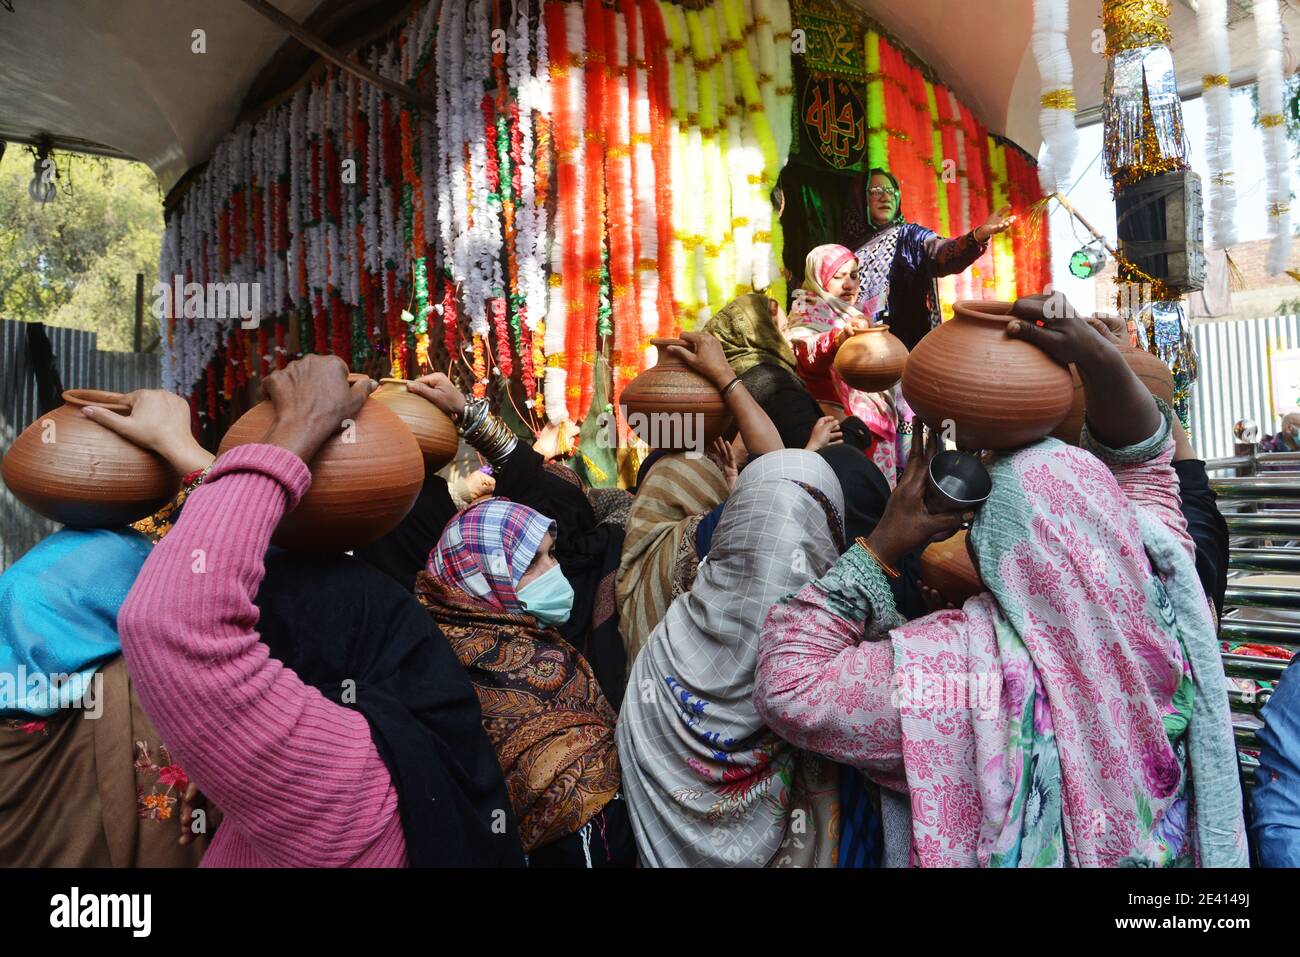 Lahore, Pakistan. 20th Jan, 2021. Pakistani women devotees bringing water for ablution of the graves at the shrine of the mausoleum of Ruqayyah Bint Ali known as Bibi Pak Daman in Lahore, Pakistan on Jan. 20, 2021. Women devotees participate rituals during 994th three days annual religious ritual washing ceremony on the eve of Urs celebrations. Bibi Pak Daman is the mausoleum of Ruqayyah bint Ali located in Lahore. Legend has it that it holds the graves of six ladies from Muhammad's household (Ahl Al-Bayt). (Photo by Rana Sajid Hussain/Pacific Press/Sipa USA) Credit: Sipa USA/Alamy Live News Stock Photo